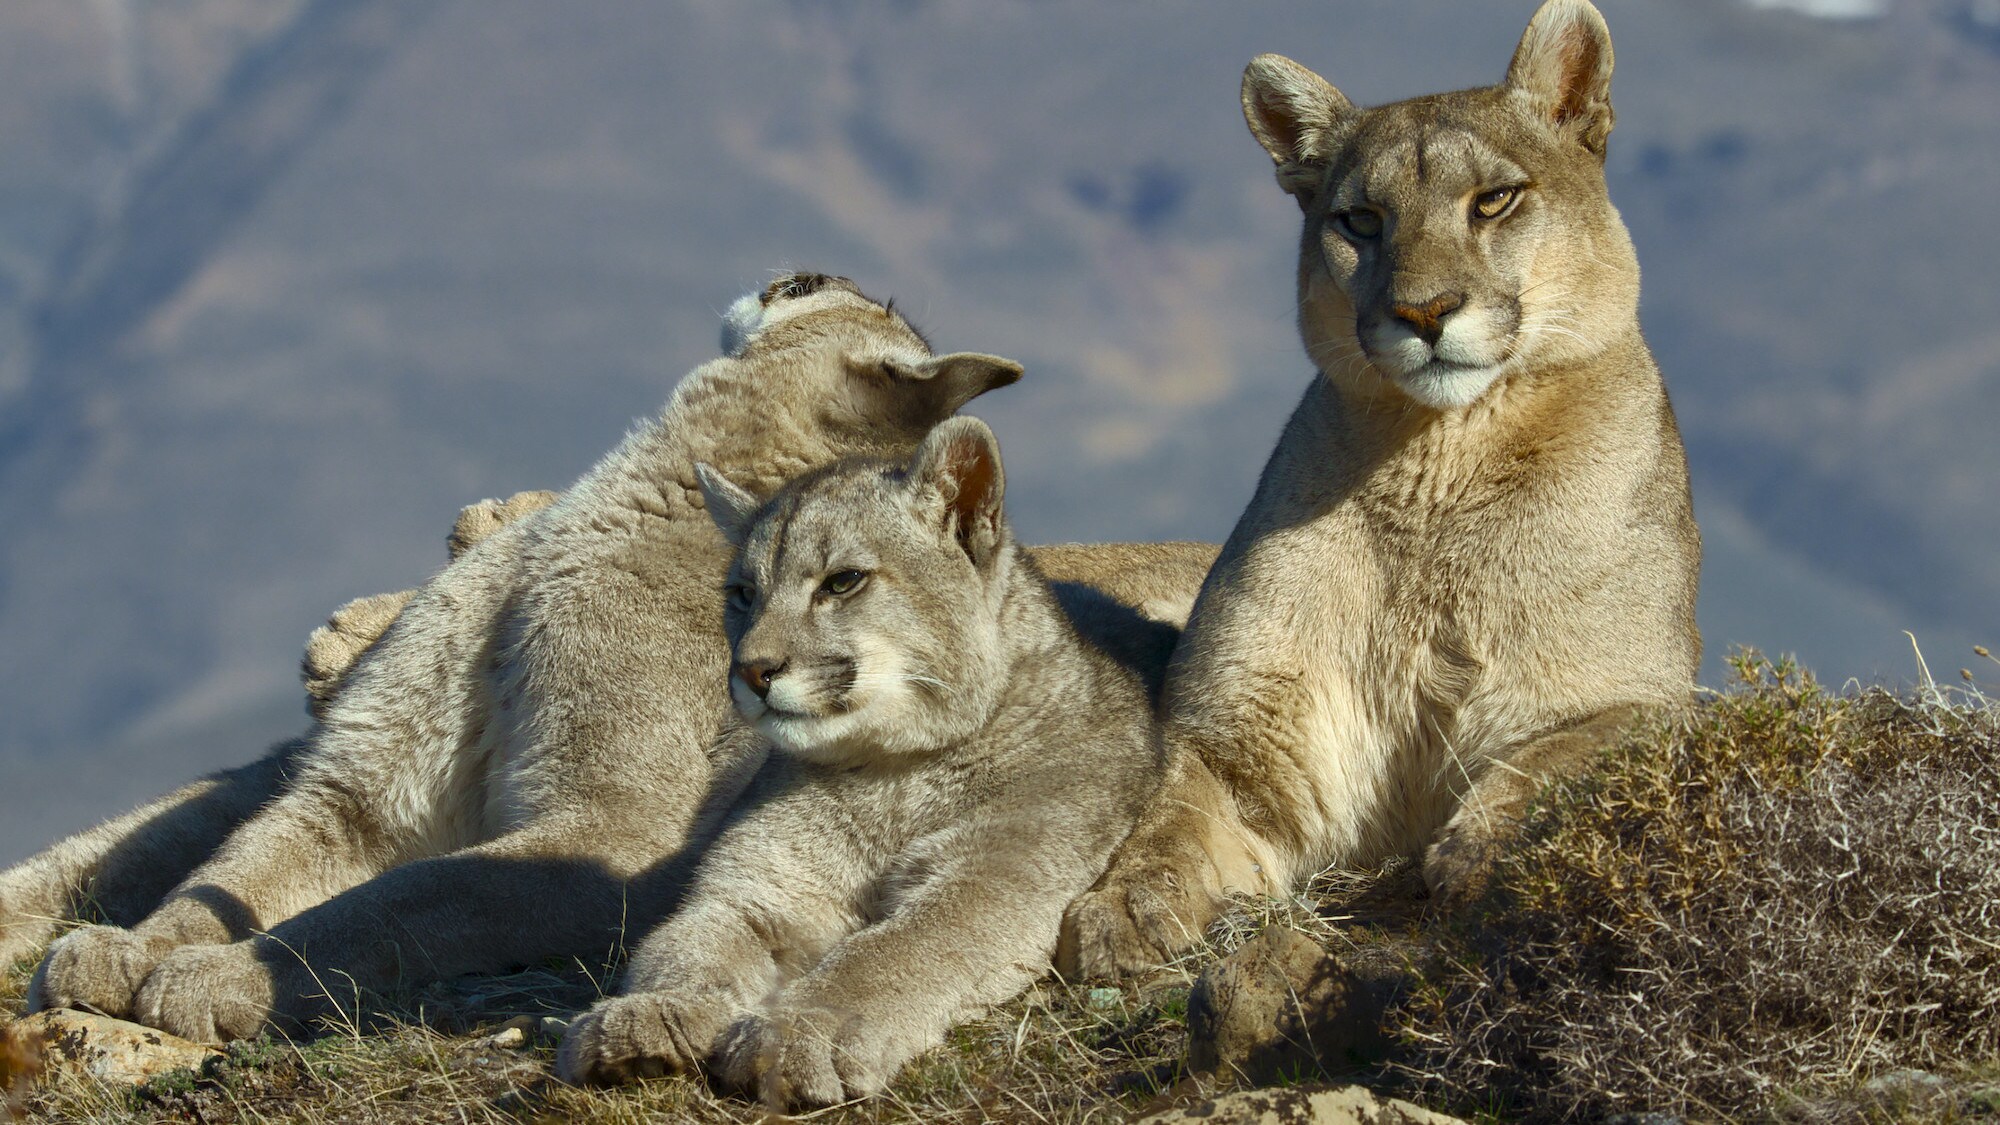 Mother Puma and cubs basking in the sunshine. (National Geographic for Disney+/Bertie Gregory)